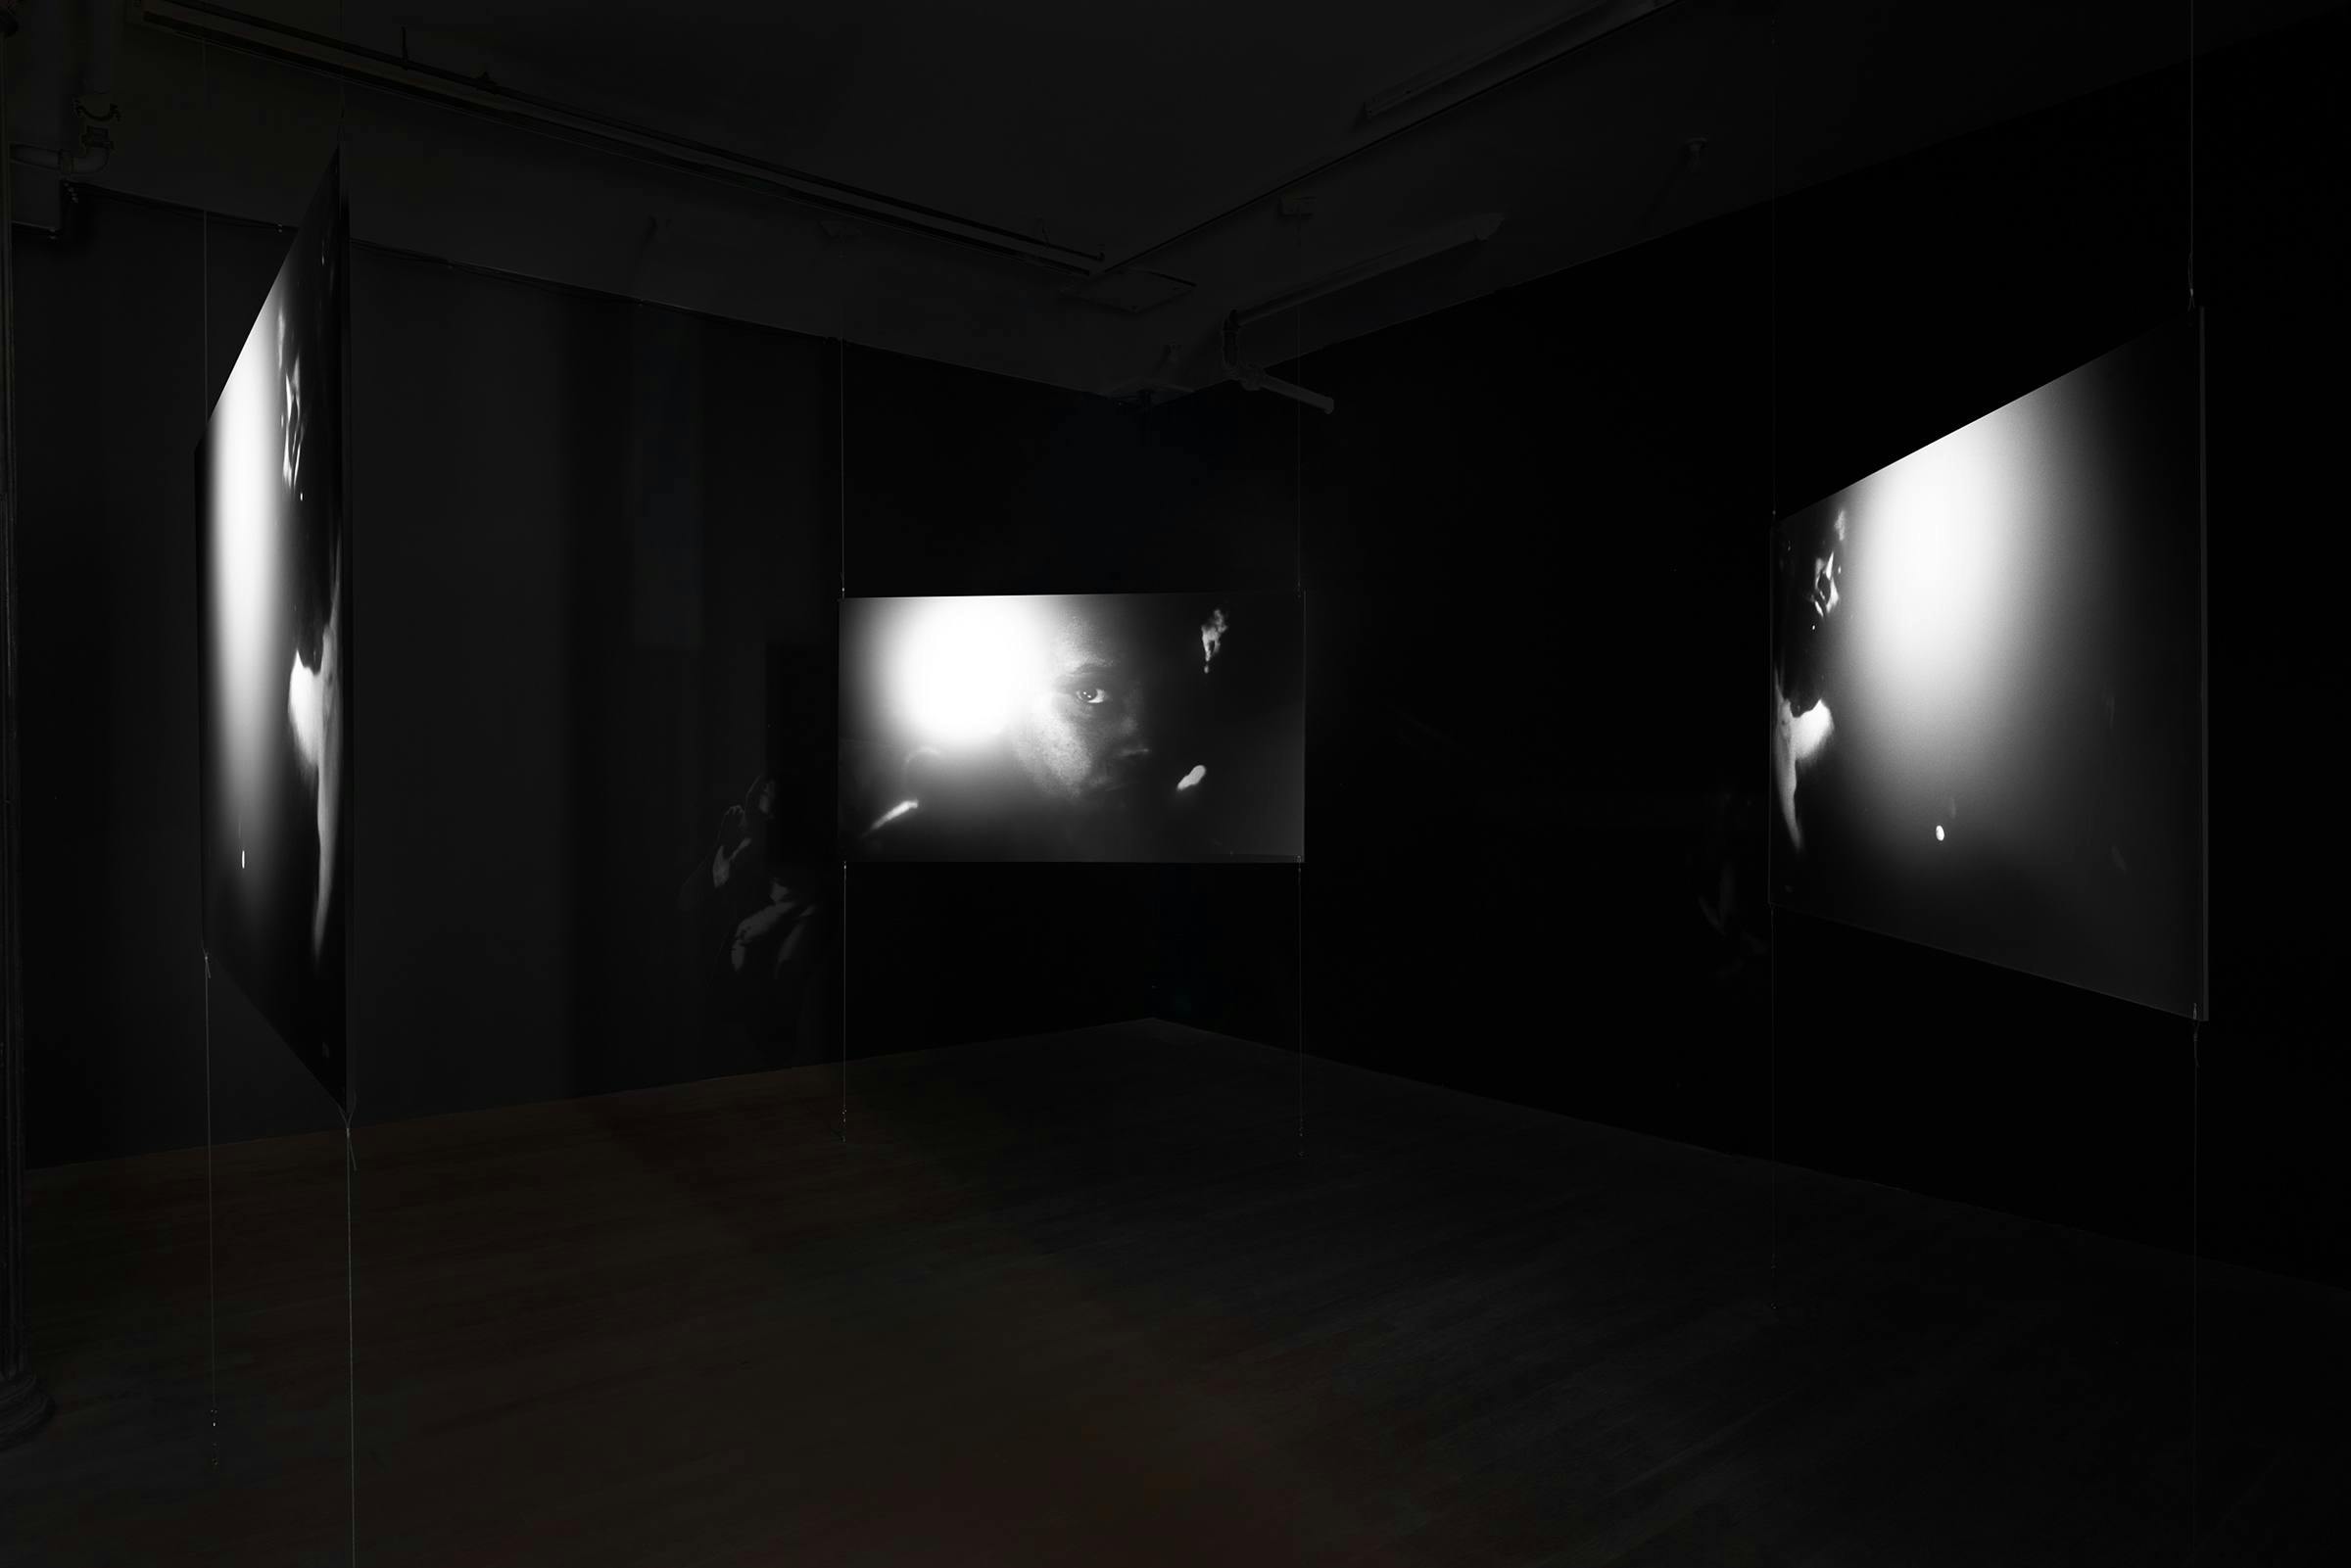 Three monochrome projection panels float equidistantly in a dark room.